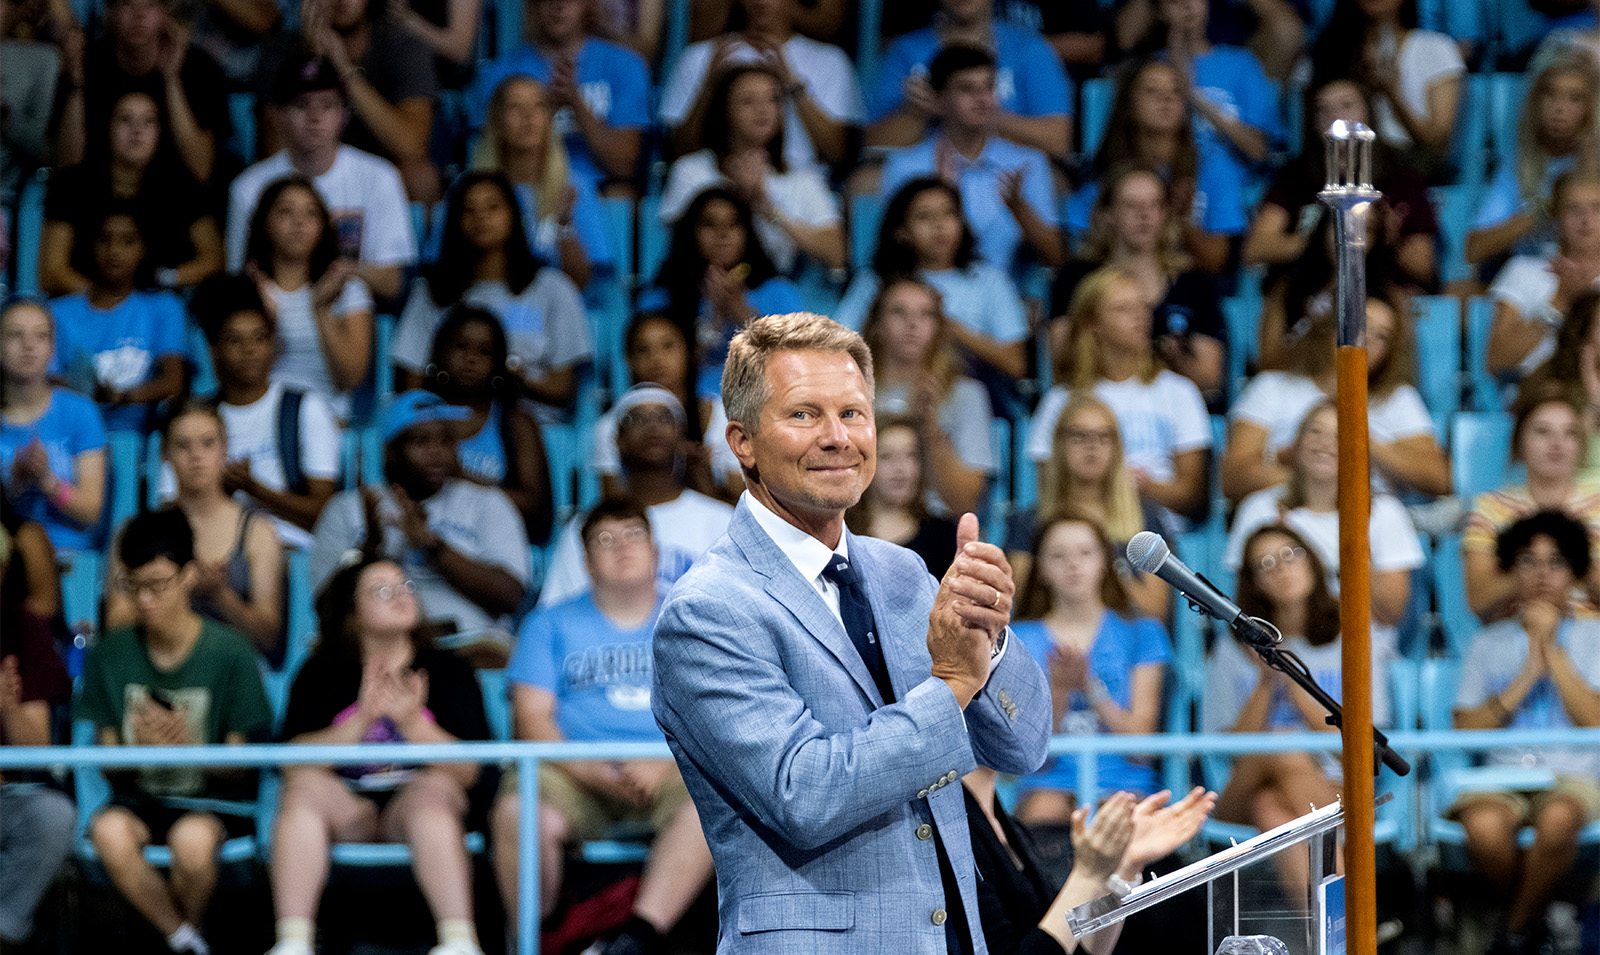 Chancellor Kevin M. Guskiewicz clapping while standing at a podium in Carmichael Arena on the campus of UNC-Chapel Hill during Convocation.